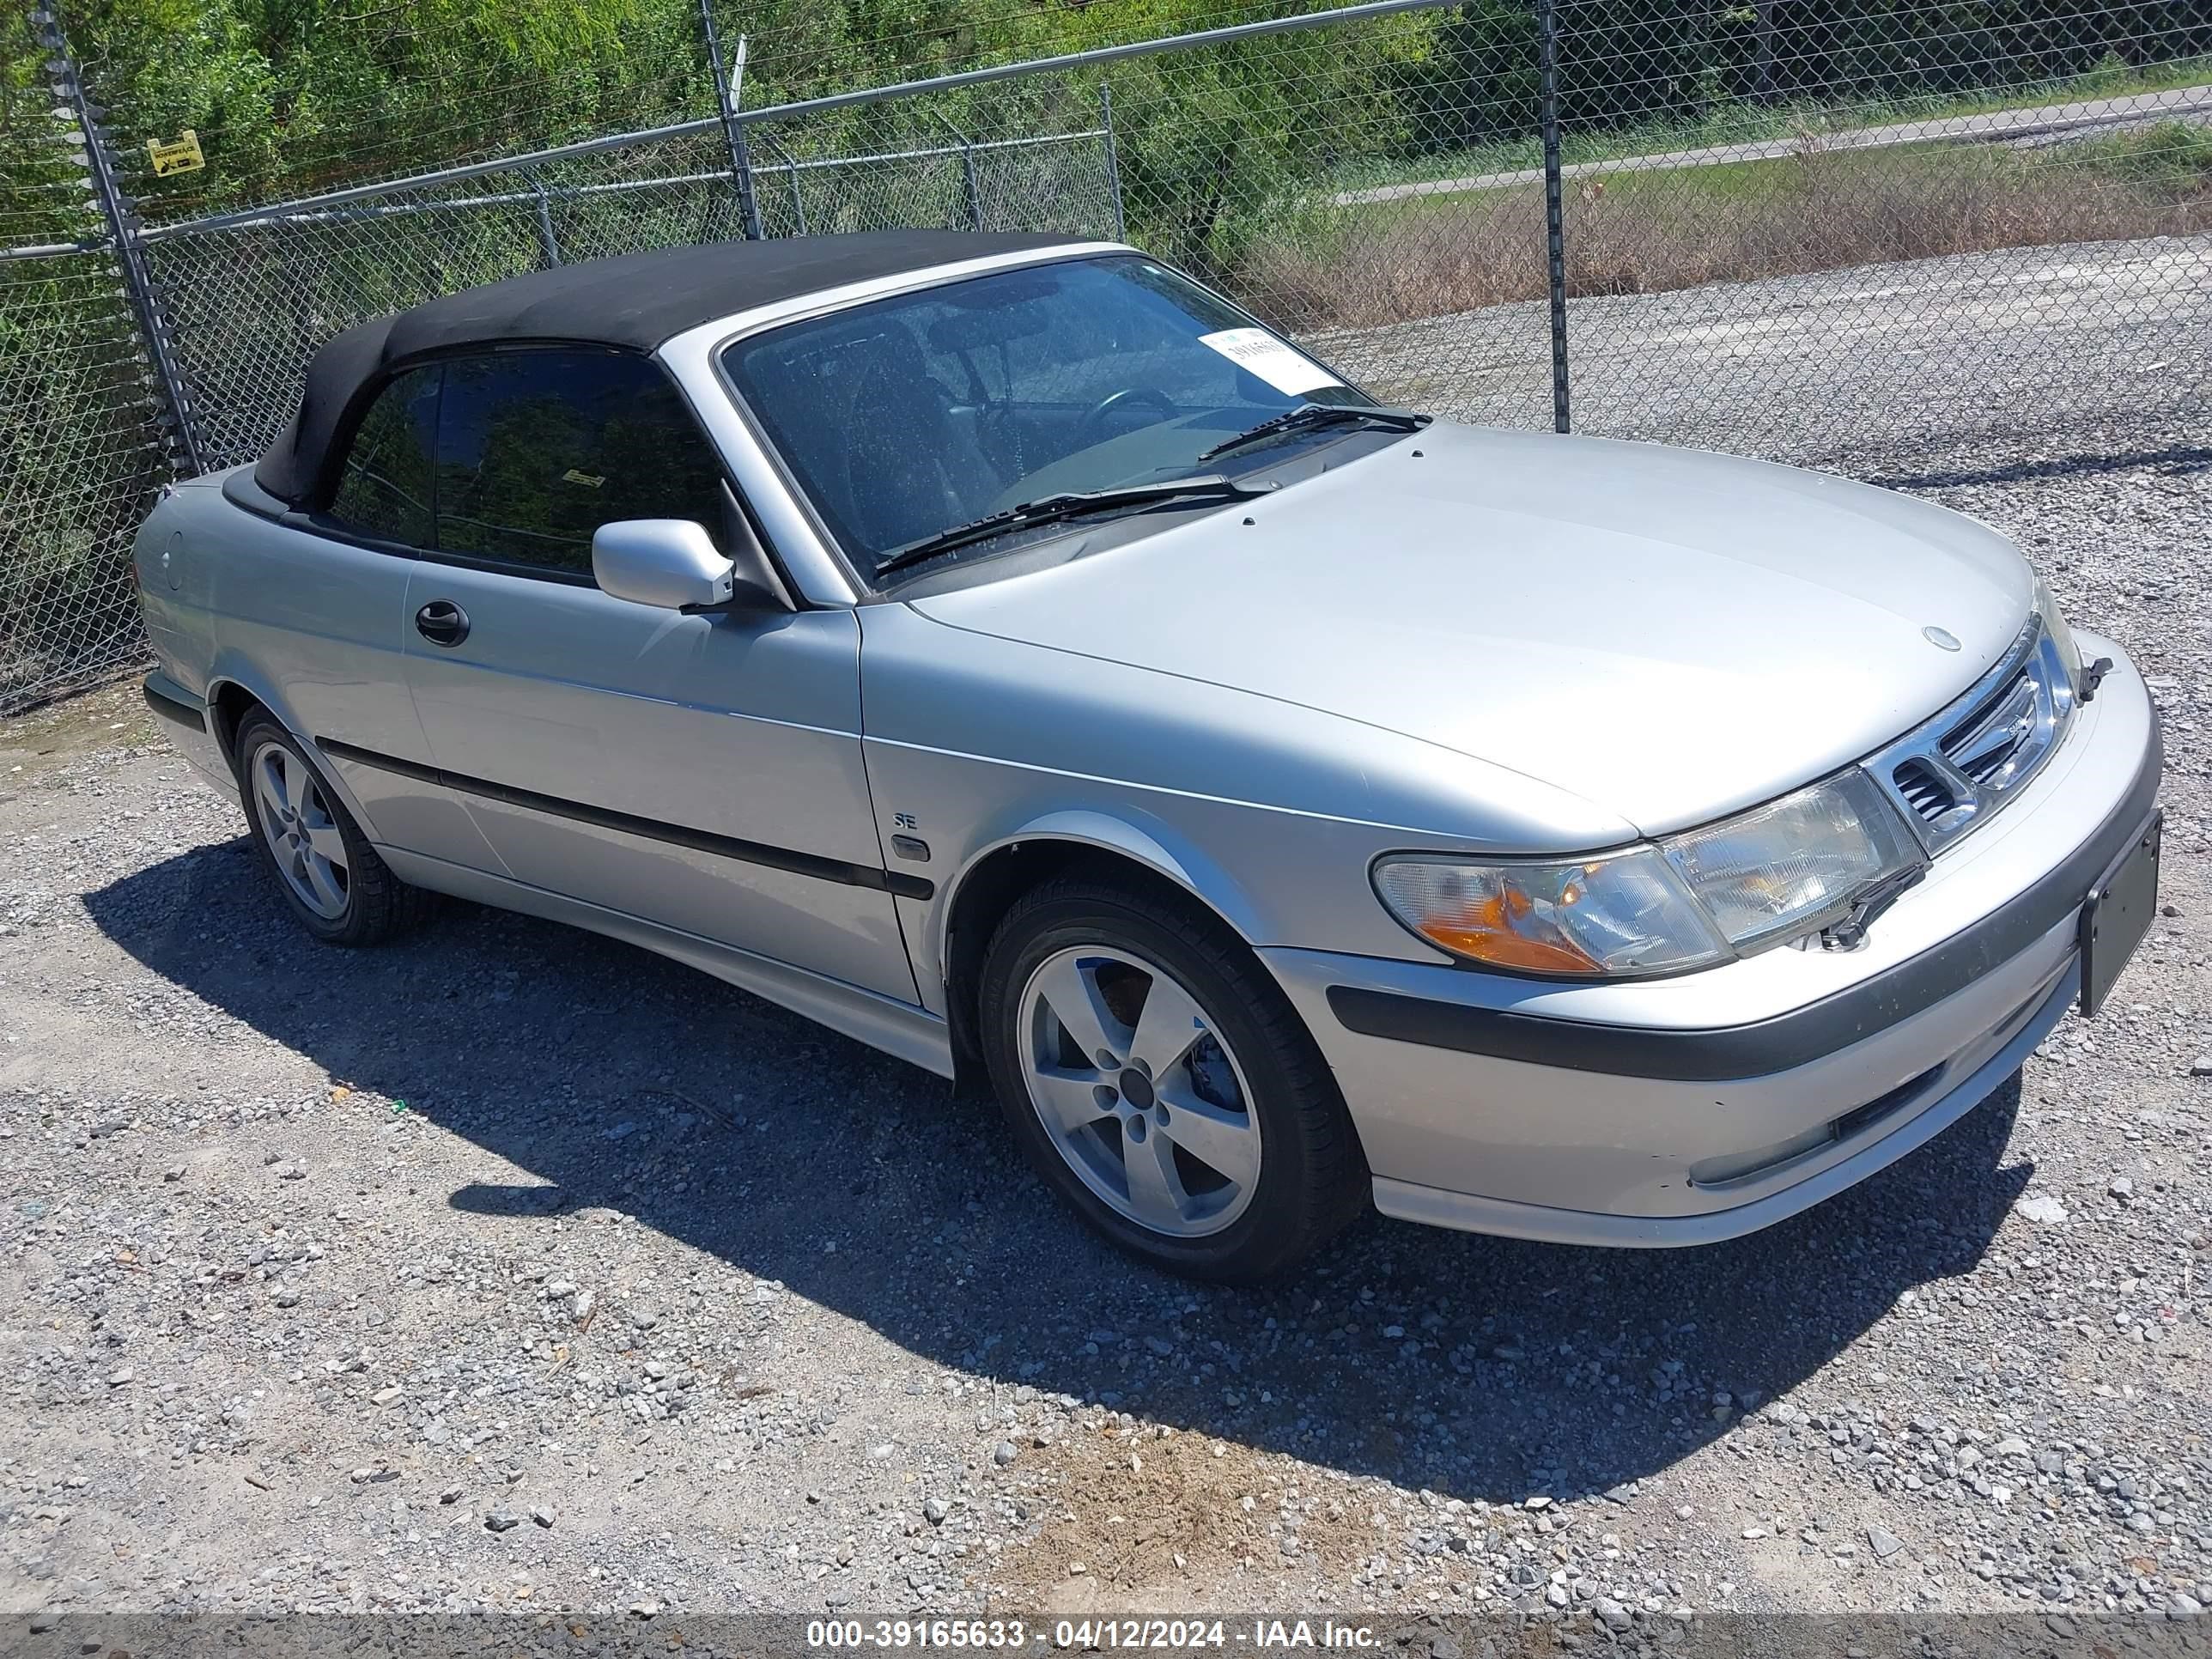 vin: YS3DF78K237000813 YS3DF78K237000813 2003 saab 9-3 2000 for Sale in 39562, 8209 Old Stage Rd, Moss Point, Mississippi, us